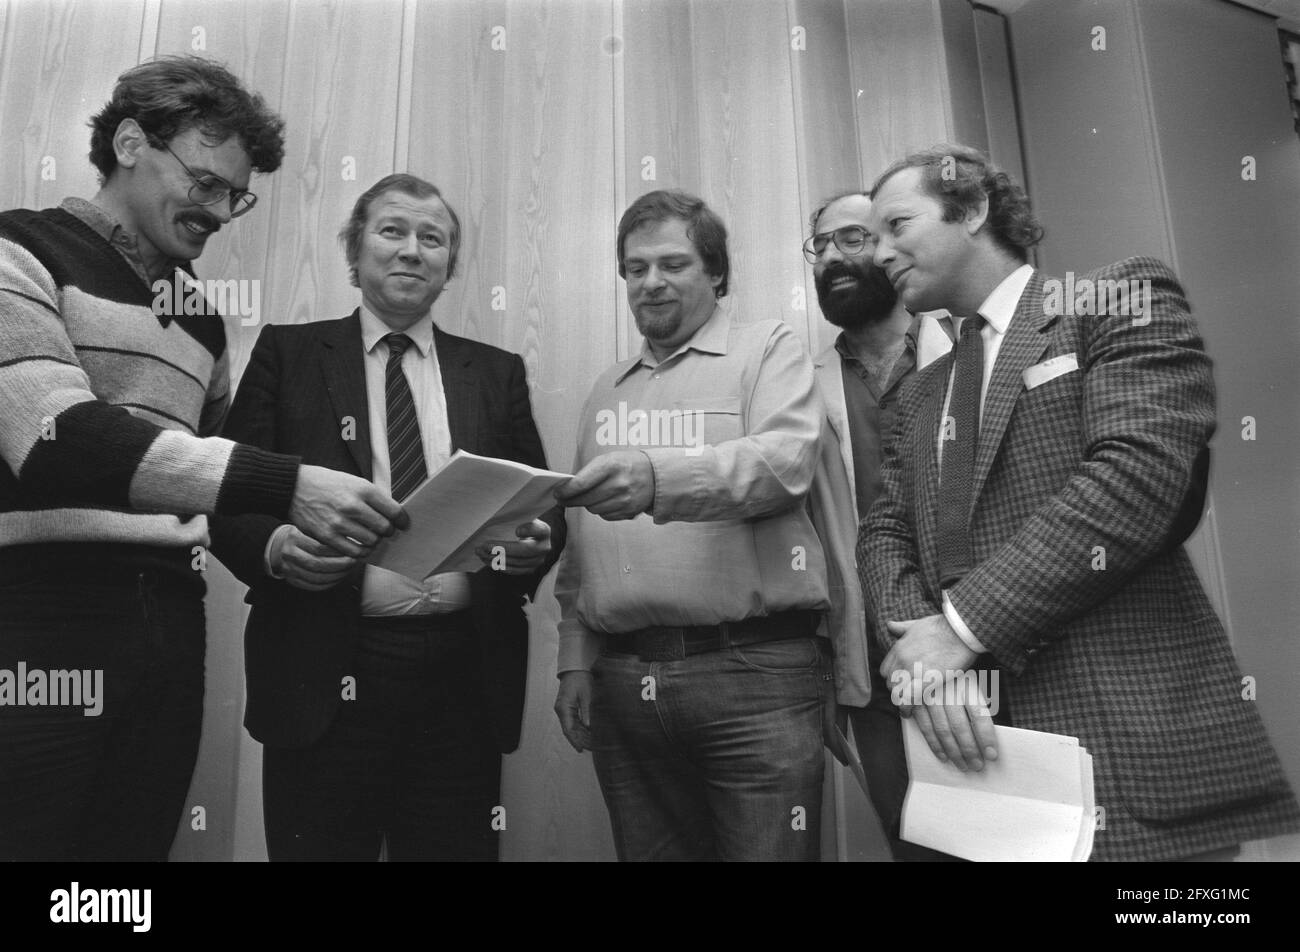 From left to right alderman Duivesteijn (PvdA, The Hague), minister Van Dam (PvdA), aldermen Schaefer (PvdA, Amsterdam) and Van Hassel (PvdA, Utrecht), November 12, 1981, ministers, reports, urban renewal, aldermen, The Netherlands, 20th century press agency photo, news to remember, documentary, historic photography 1945-1990, visual stories, human history of the Twentieth Century, capturing moments in time Stock Photo